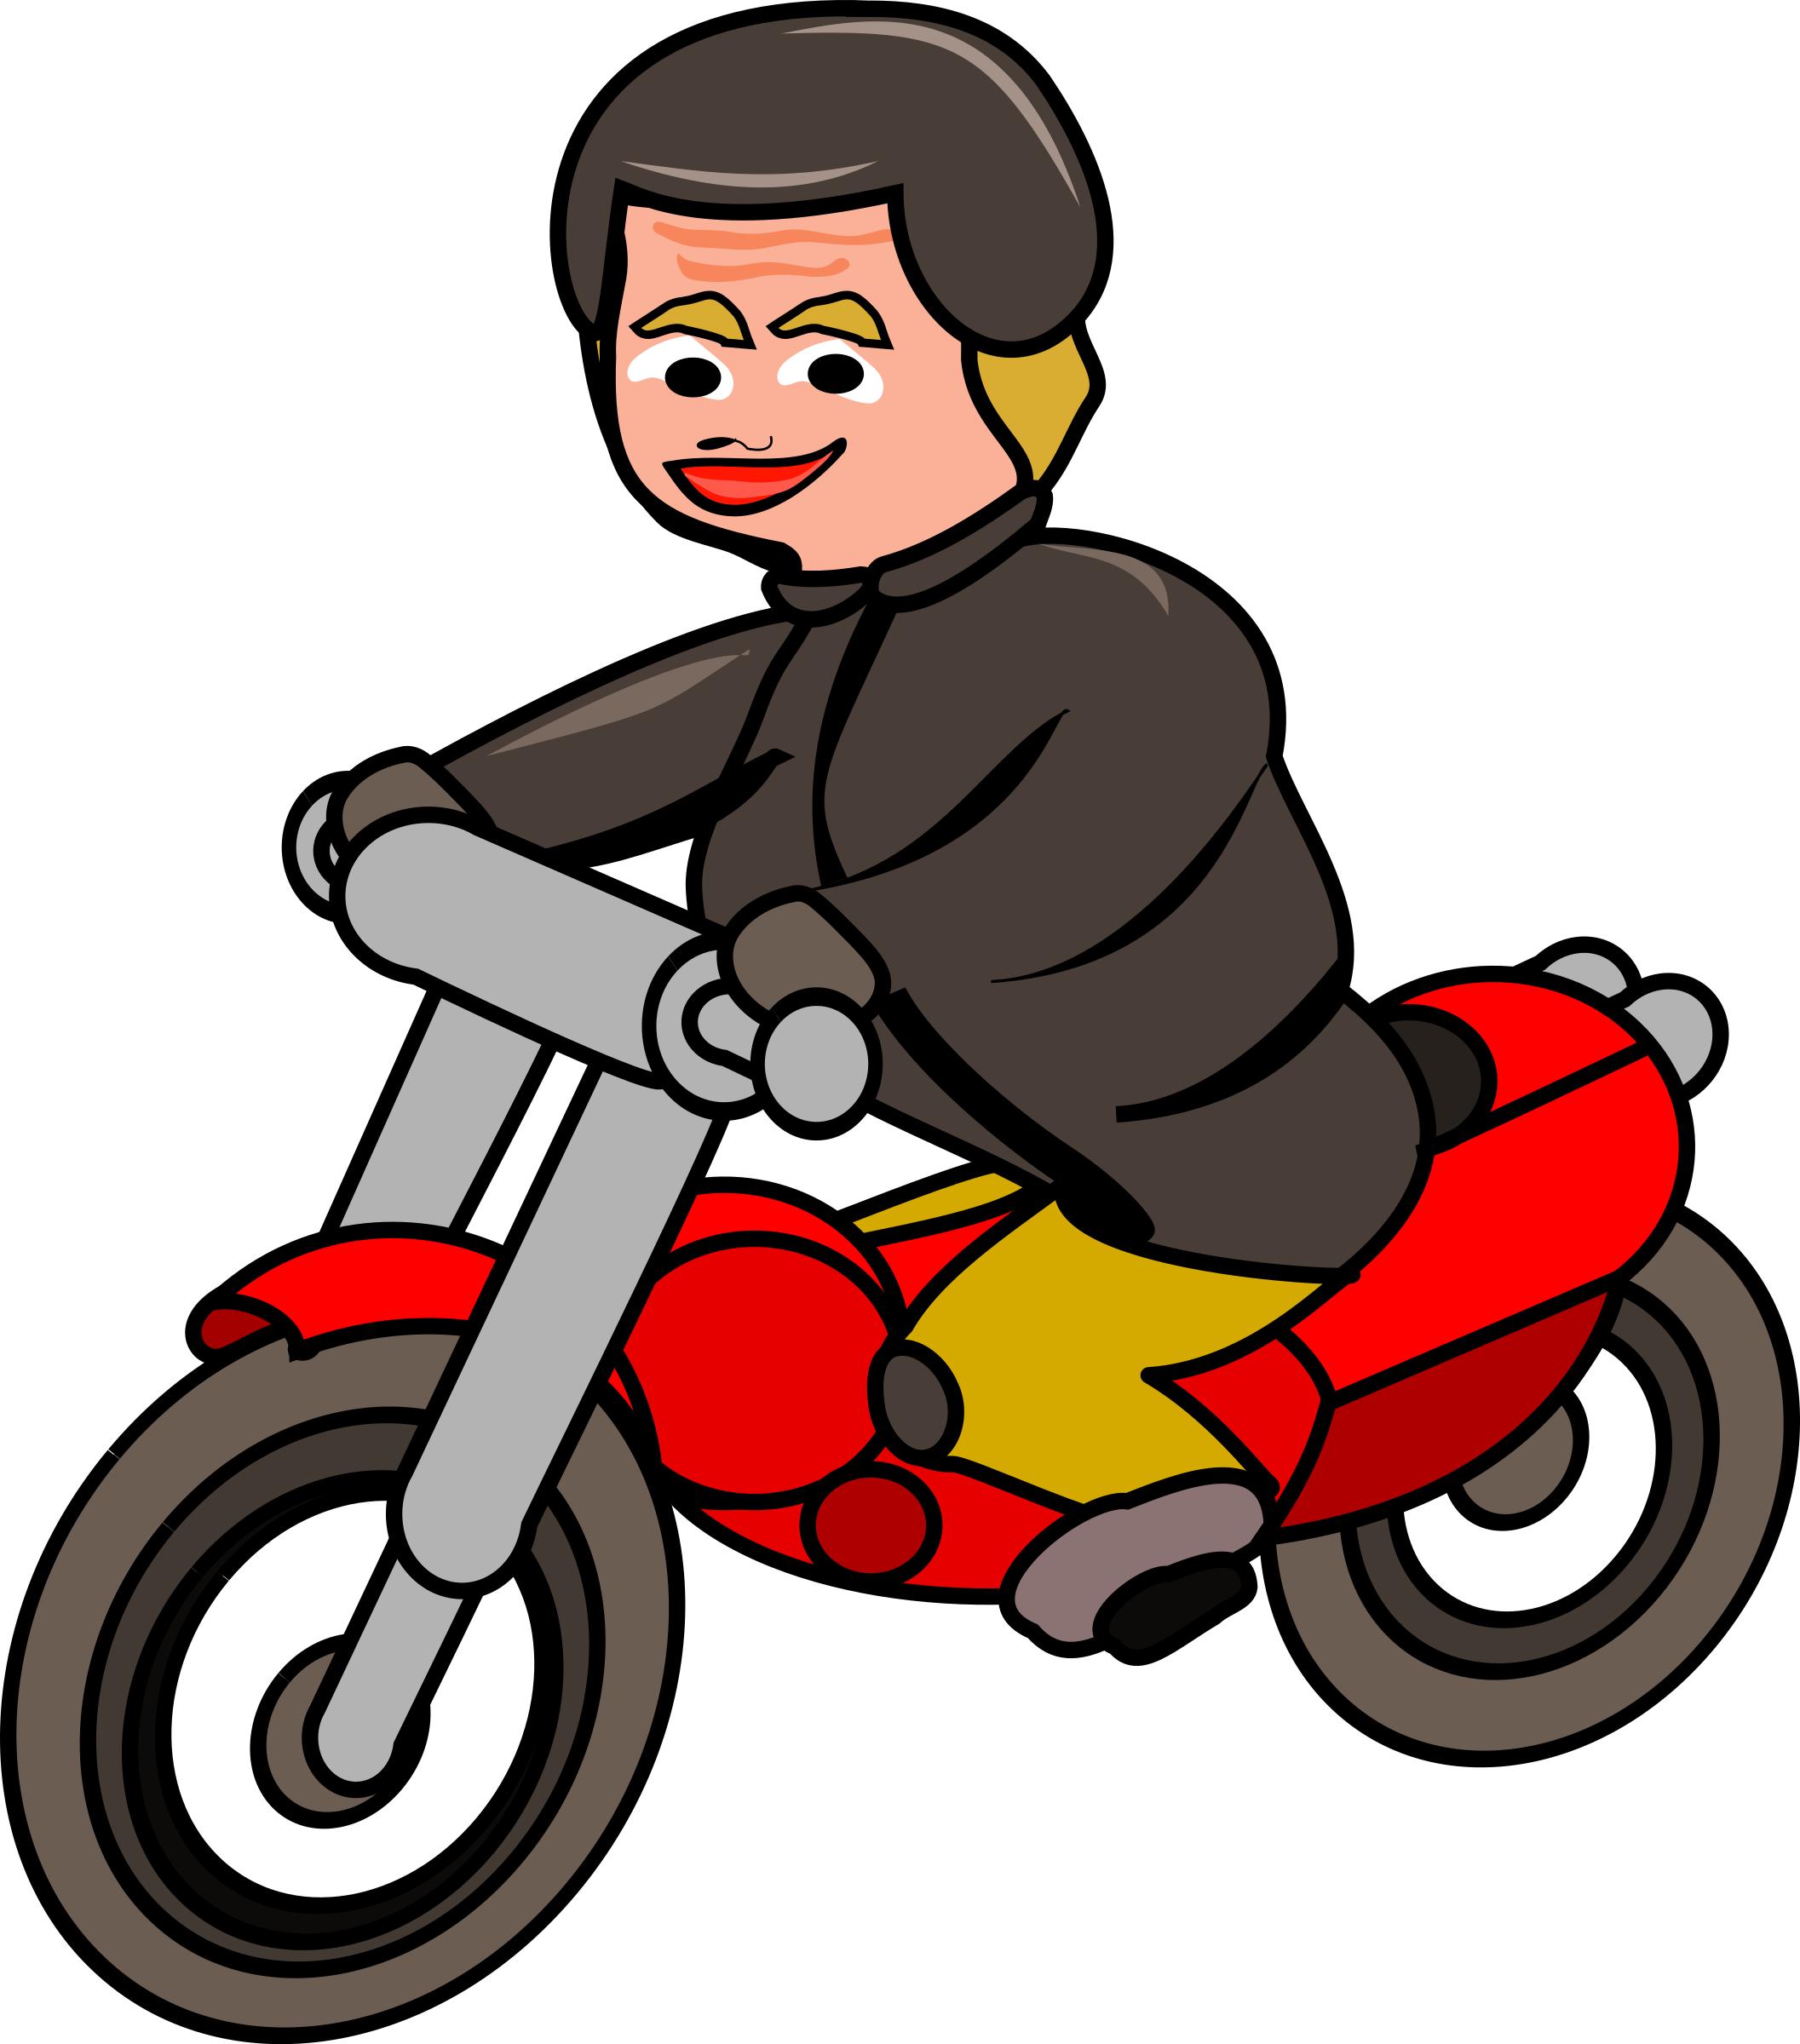 Woman on motorbike PNG icons